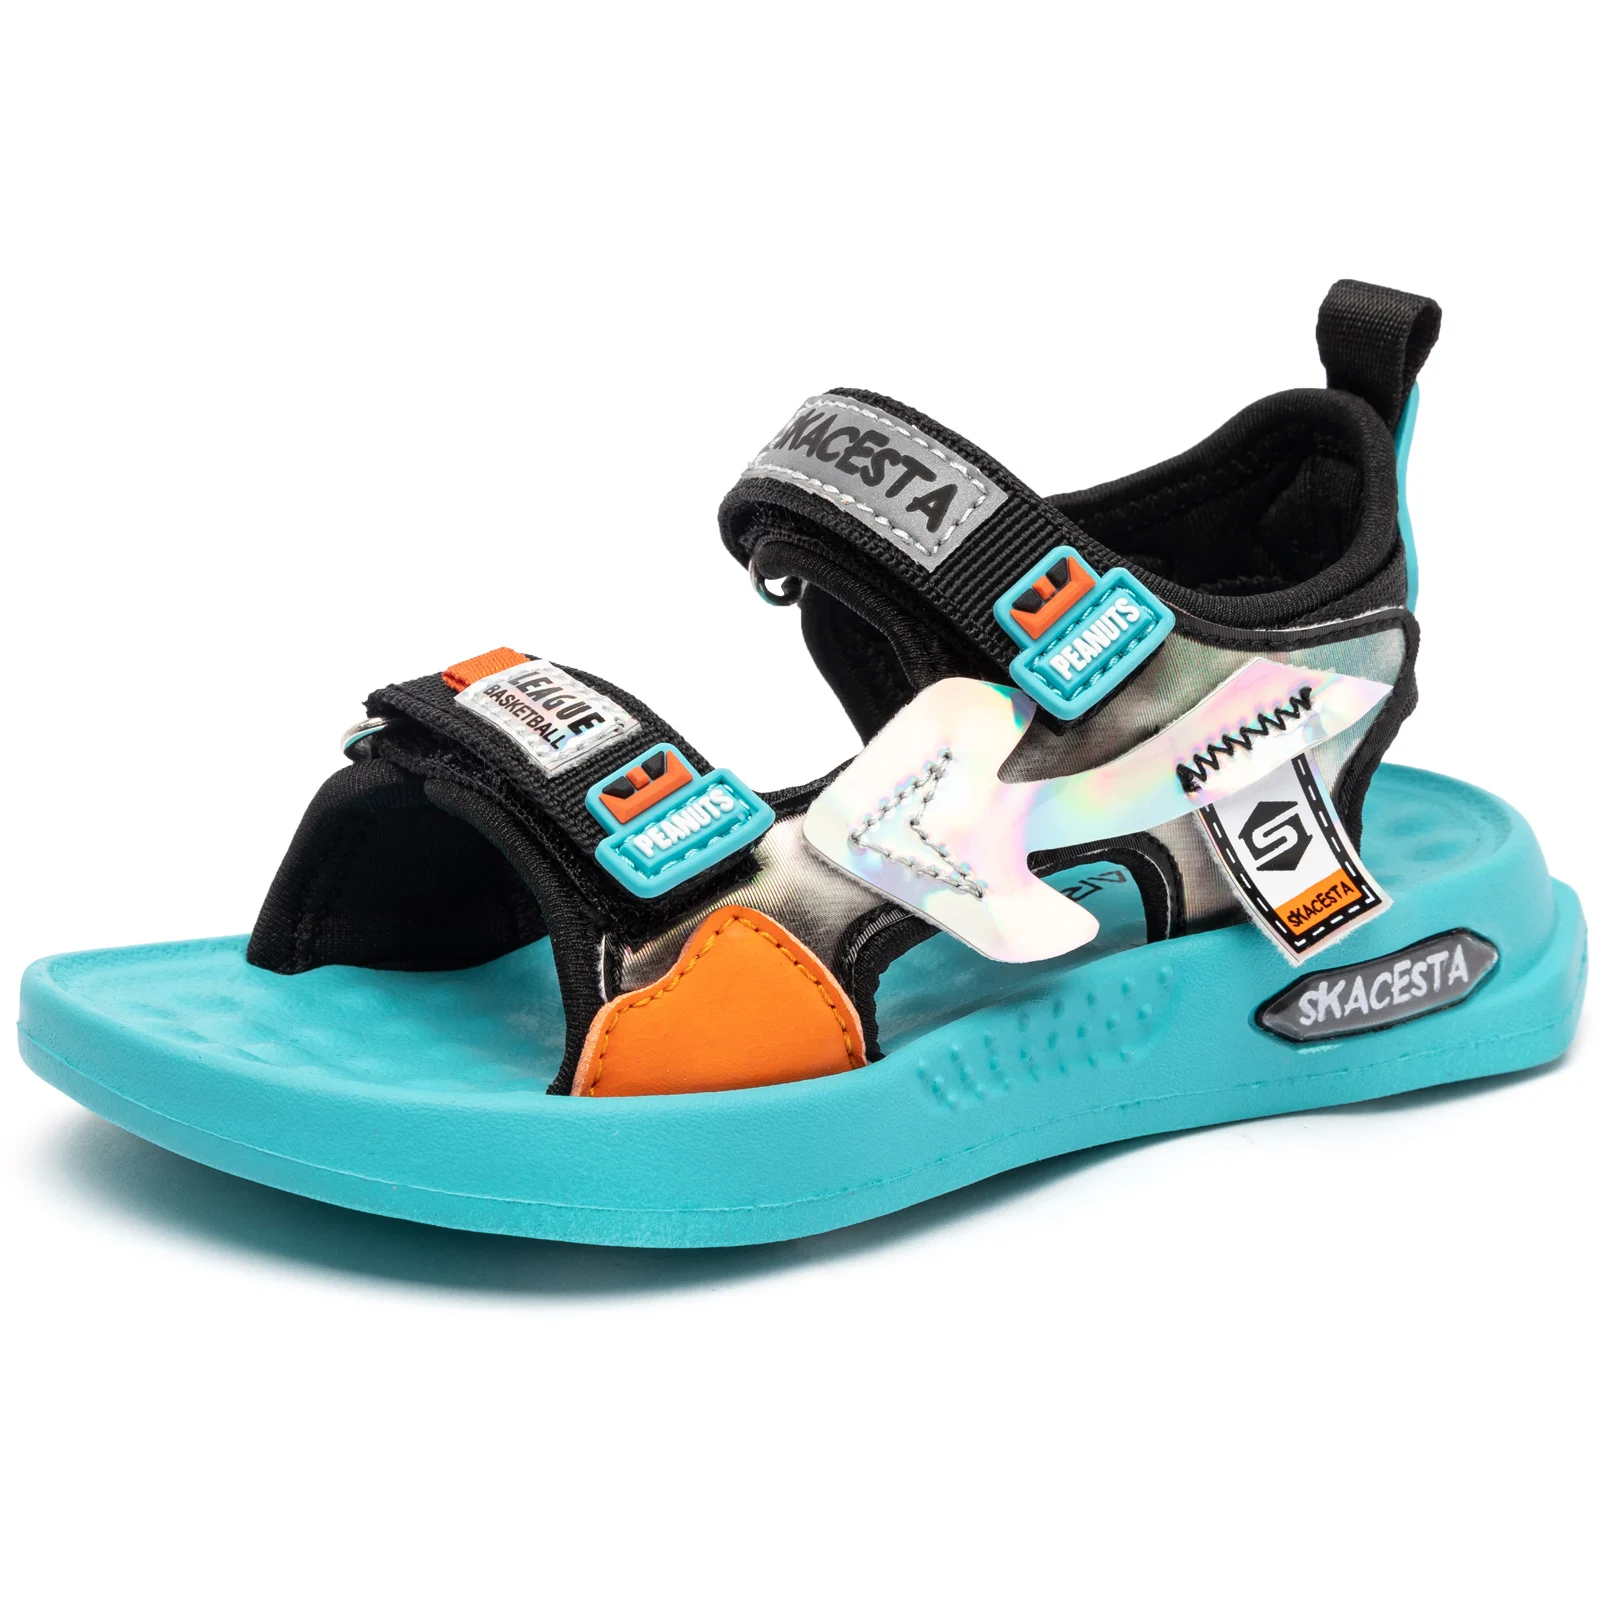 

Hobibear Summer 2021 Girls Light Weight Boys Sandal Outdoor Children's Sandals for Kids, Three color as photo show or as required